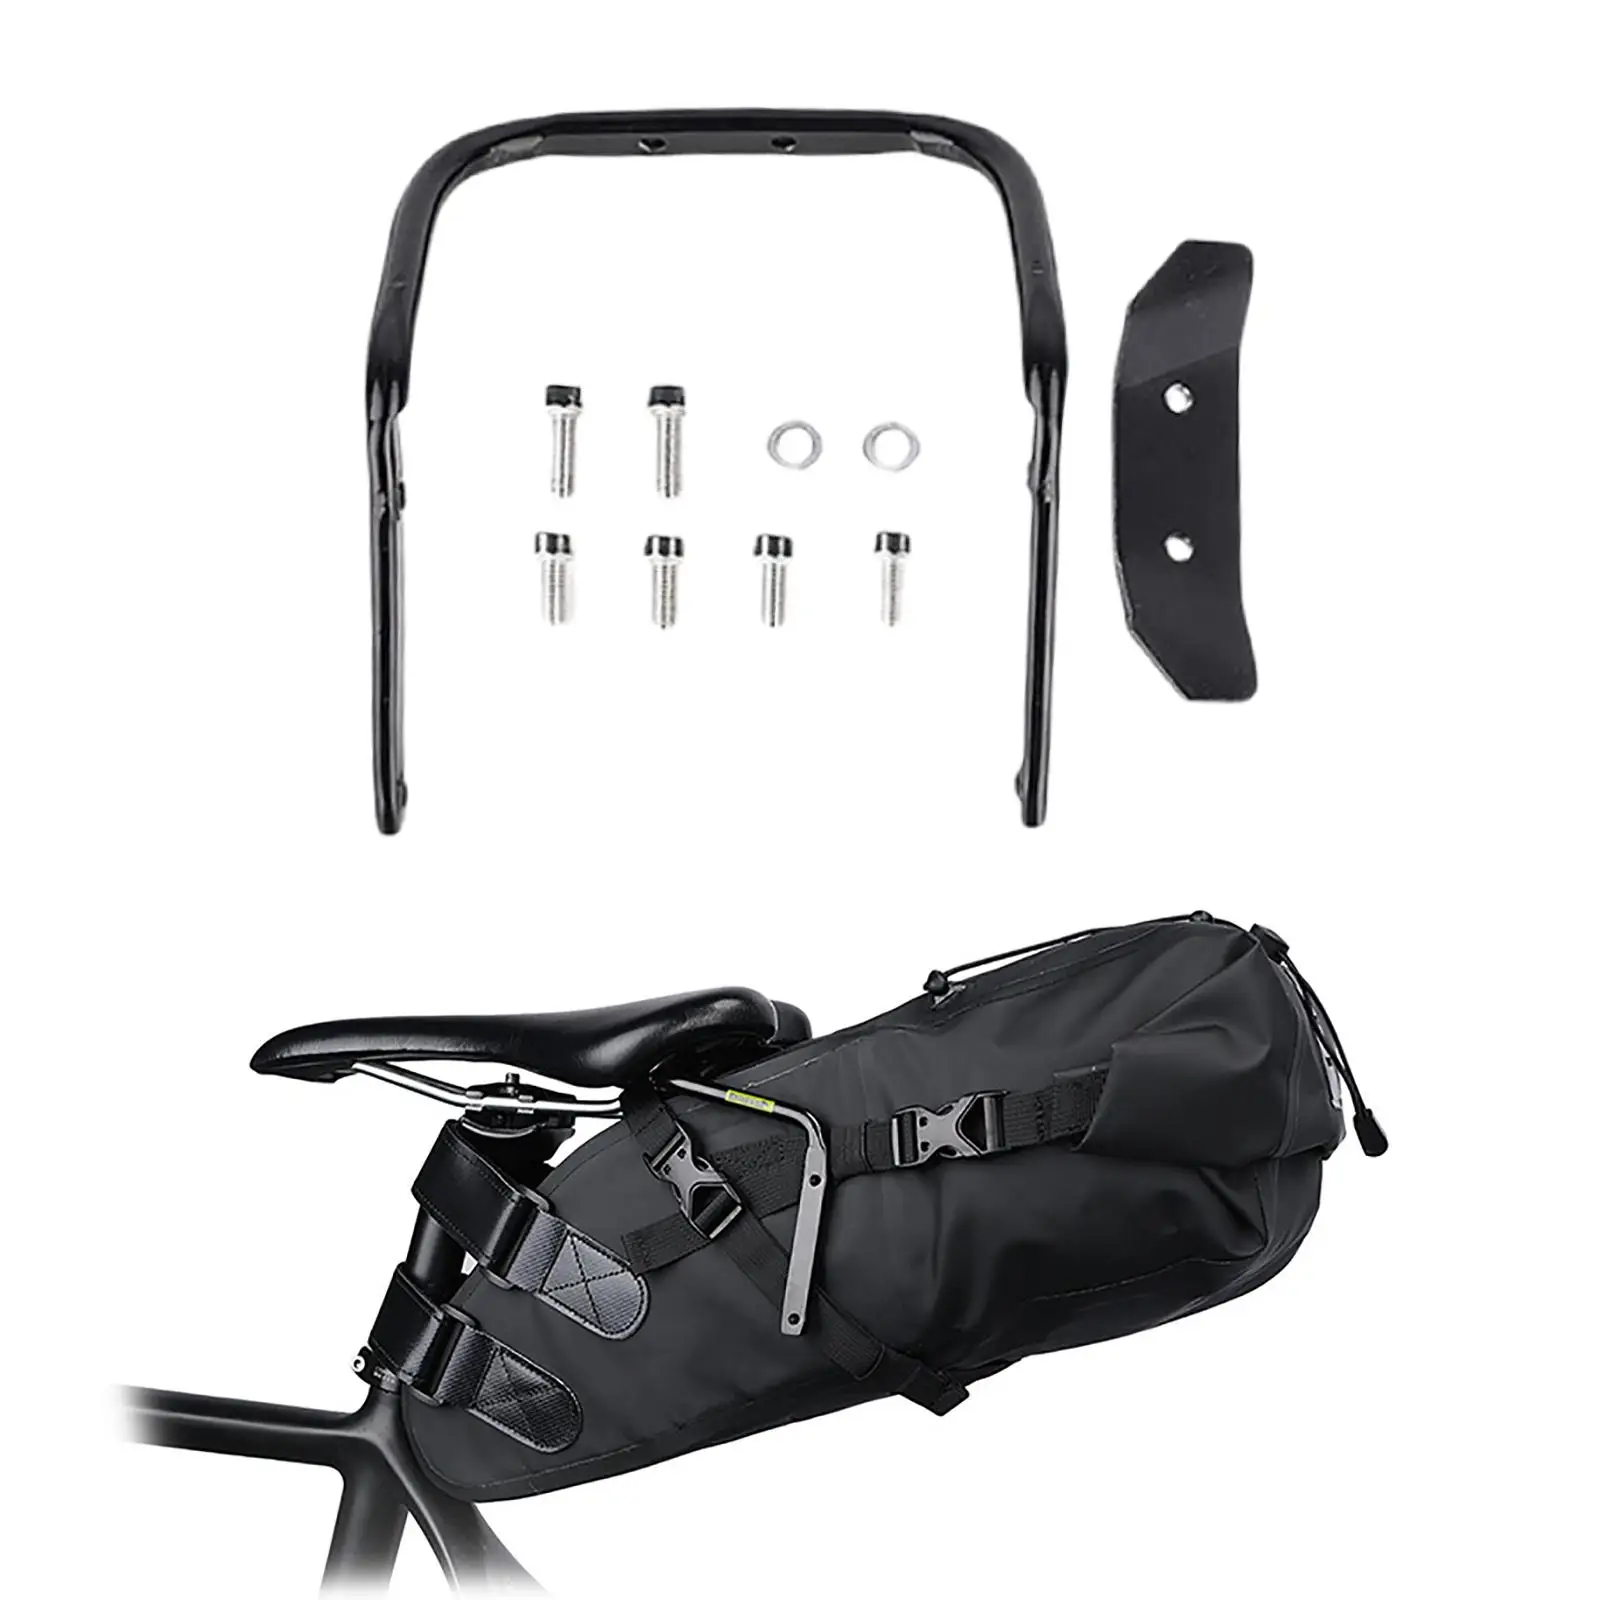 Bicycle Tail Bag Stabilizer Aluminum Alloy Cycling Riding Anti-Shake Bike Accessories Saddle Bag Stabilizer Mount for Bike